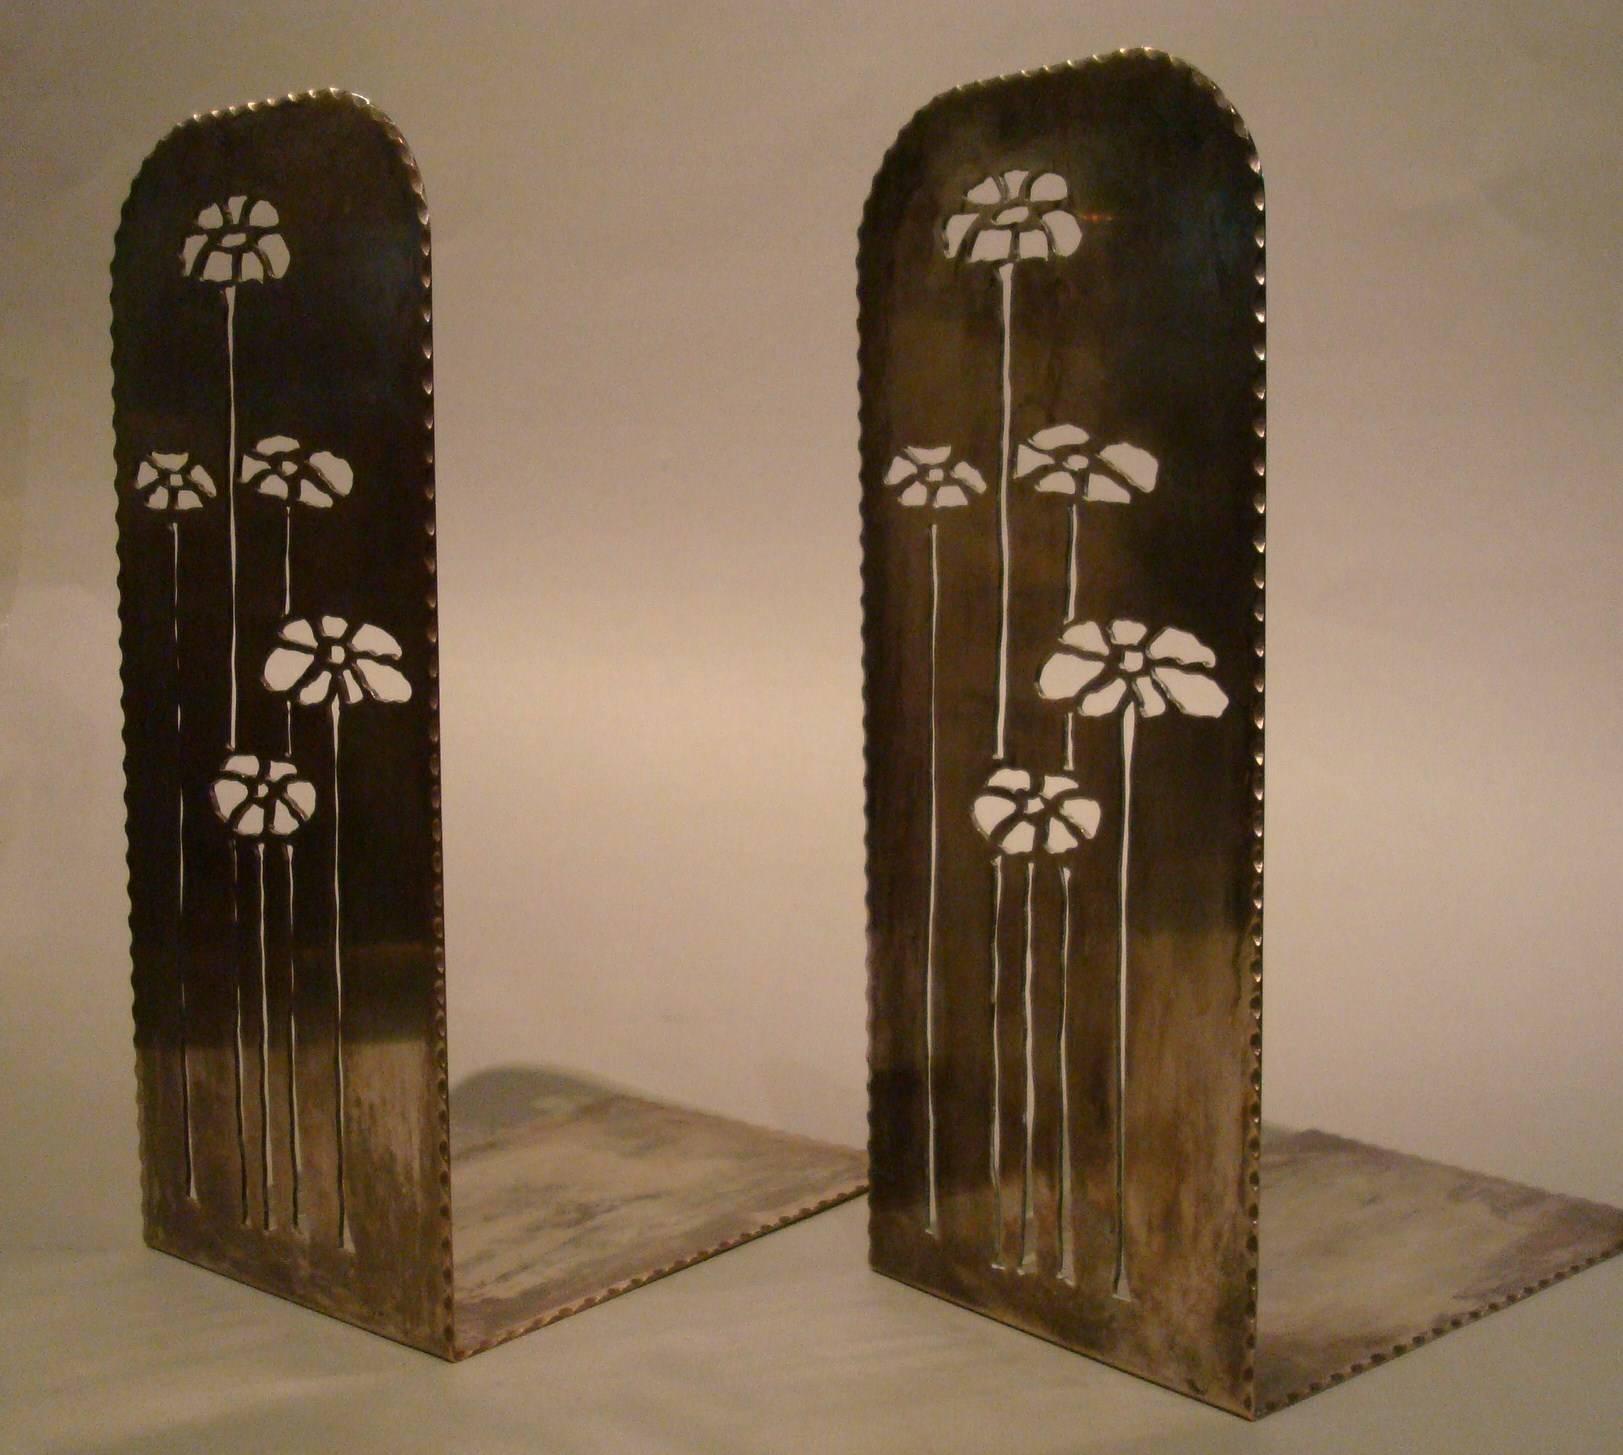 Art Nouveau pair of Newcomb College Pierced Brass Bookends
A pair of Newcomb College Pierced Brass Bookends, circa 1930, by Rosalie Roos Wiener, decorated with oxeye daisies, silvered patina, unmarked. A nearly identical pair of bookends is